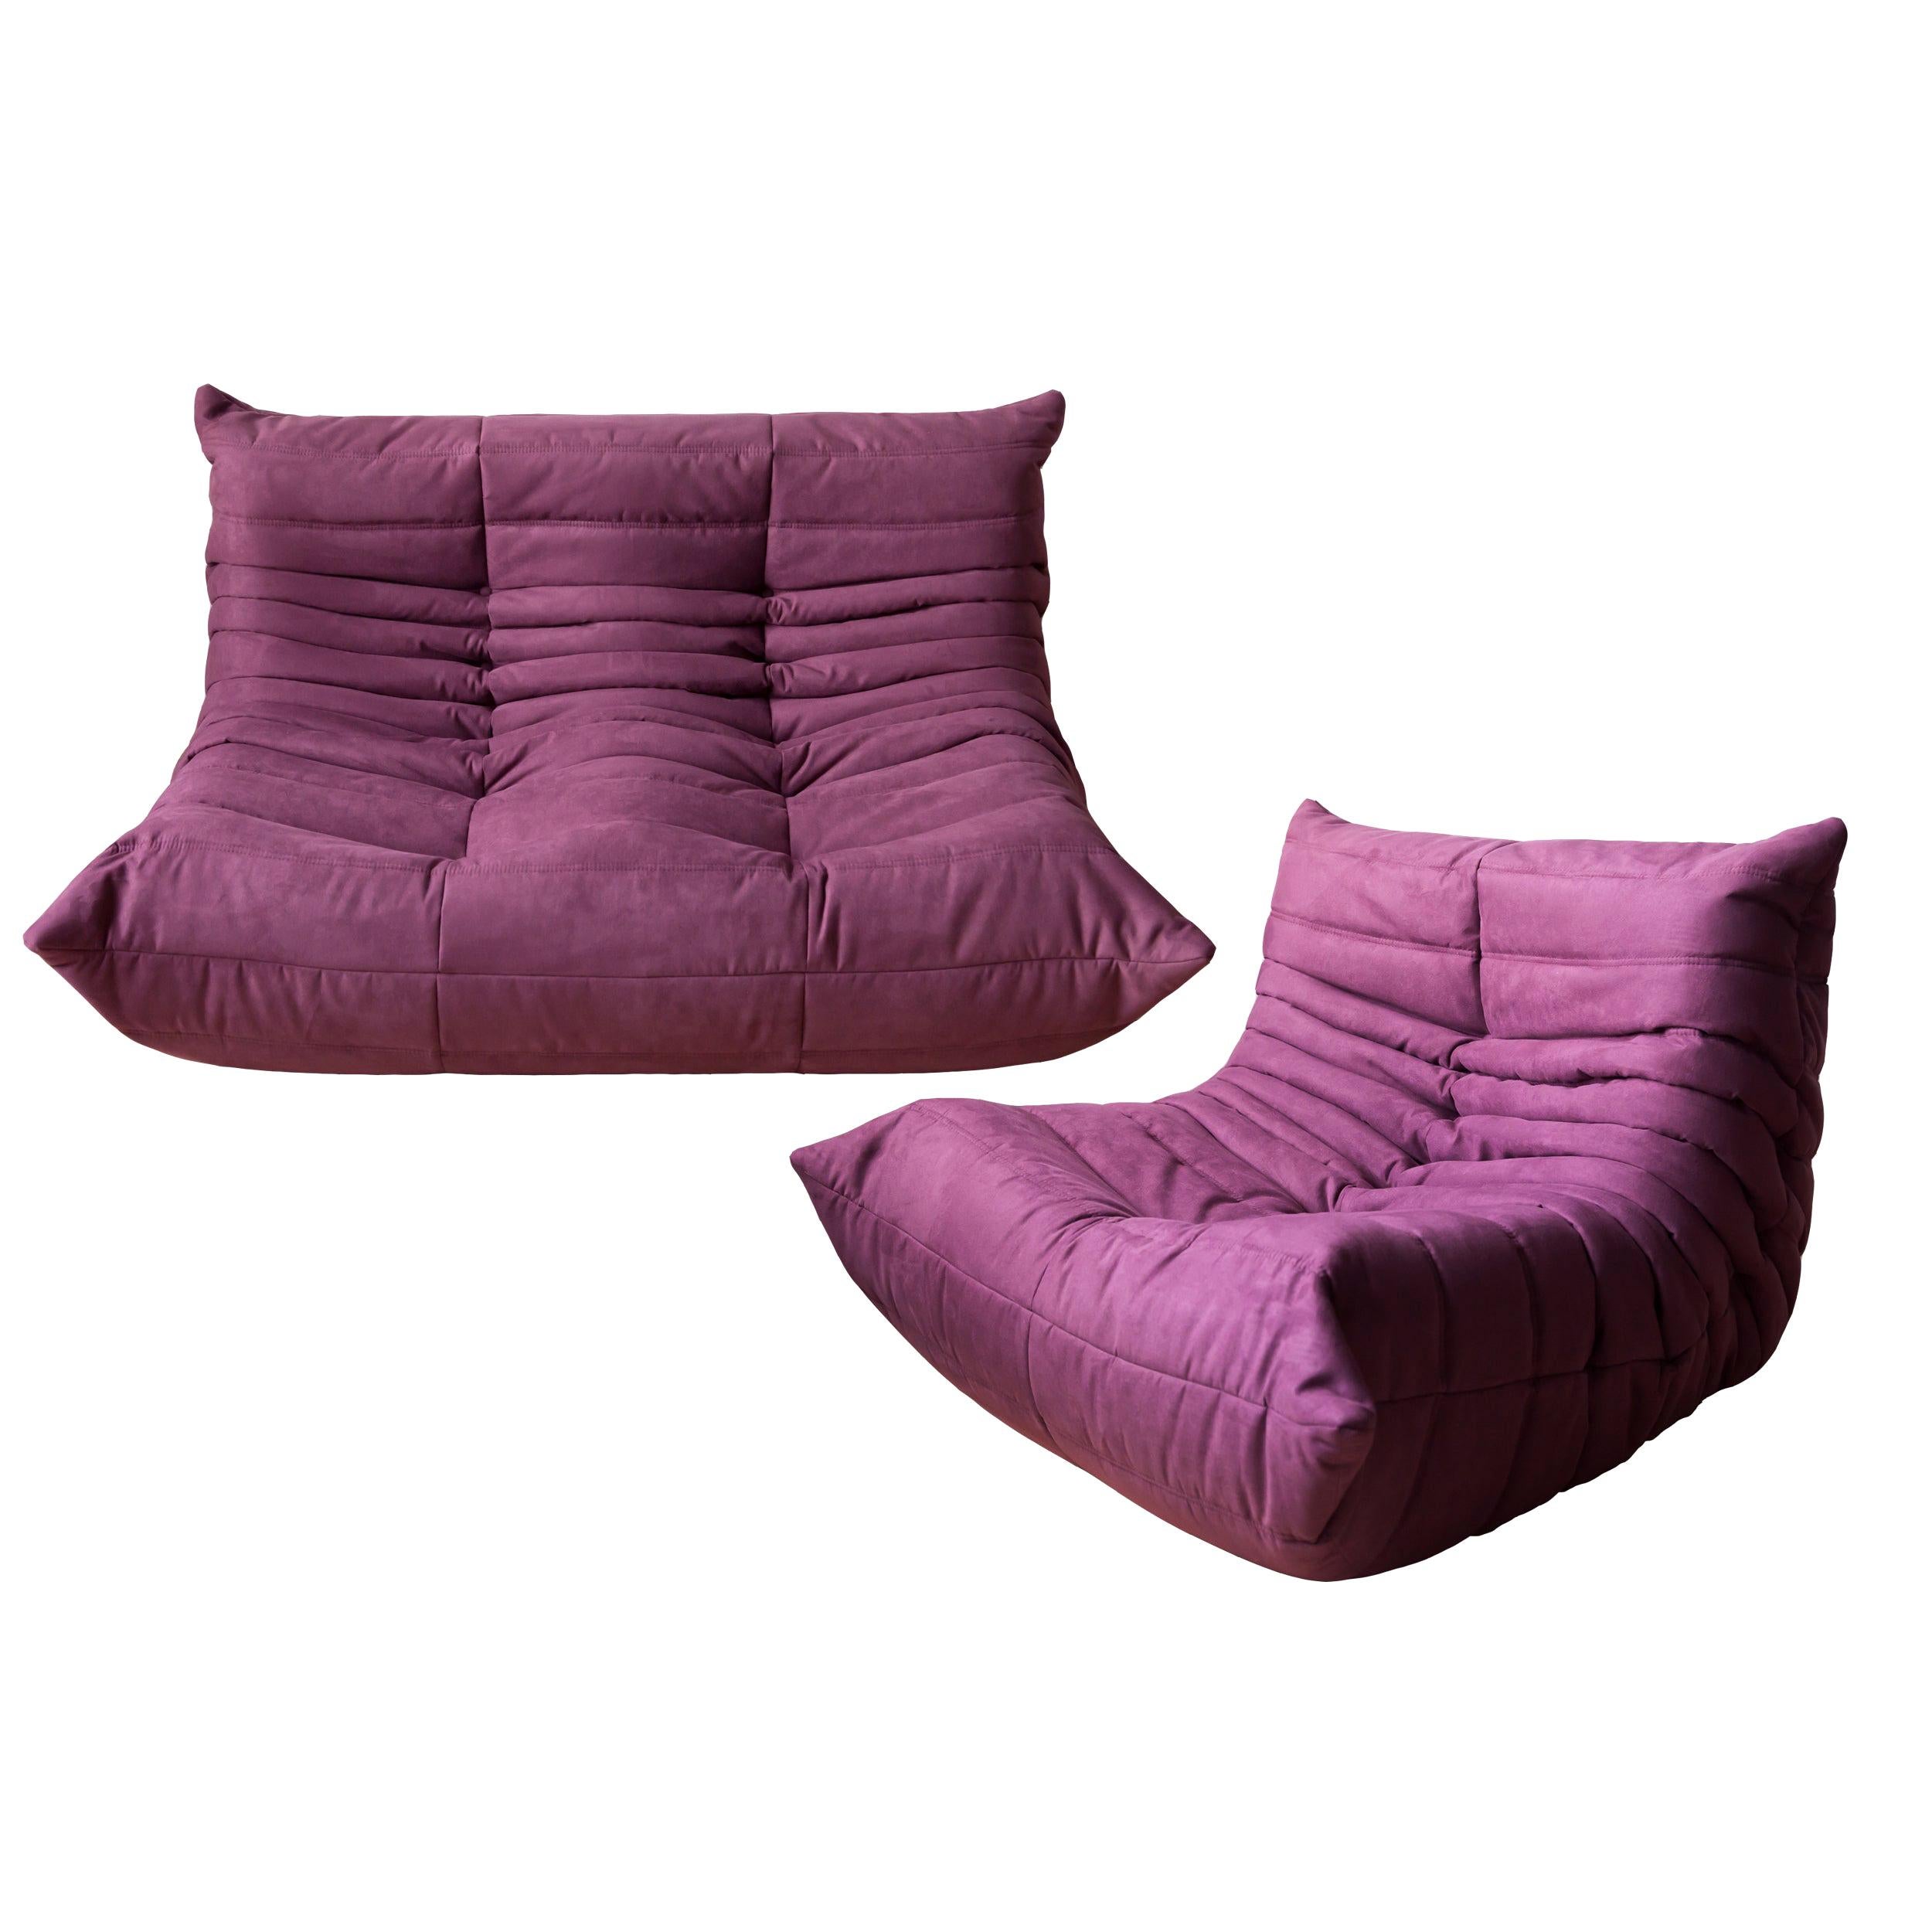 Togo Two-Piece Set, Design by Michel Ducaroy, Manufactured by Ligne Roset For Sale